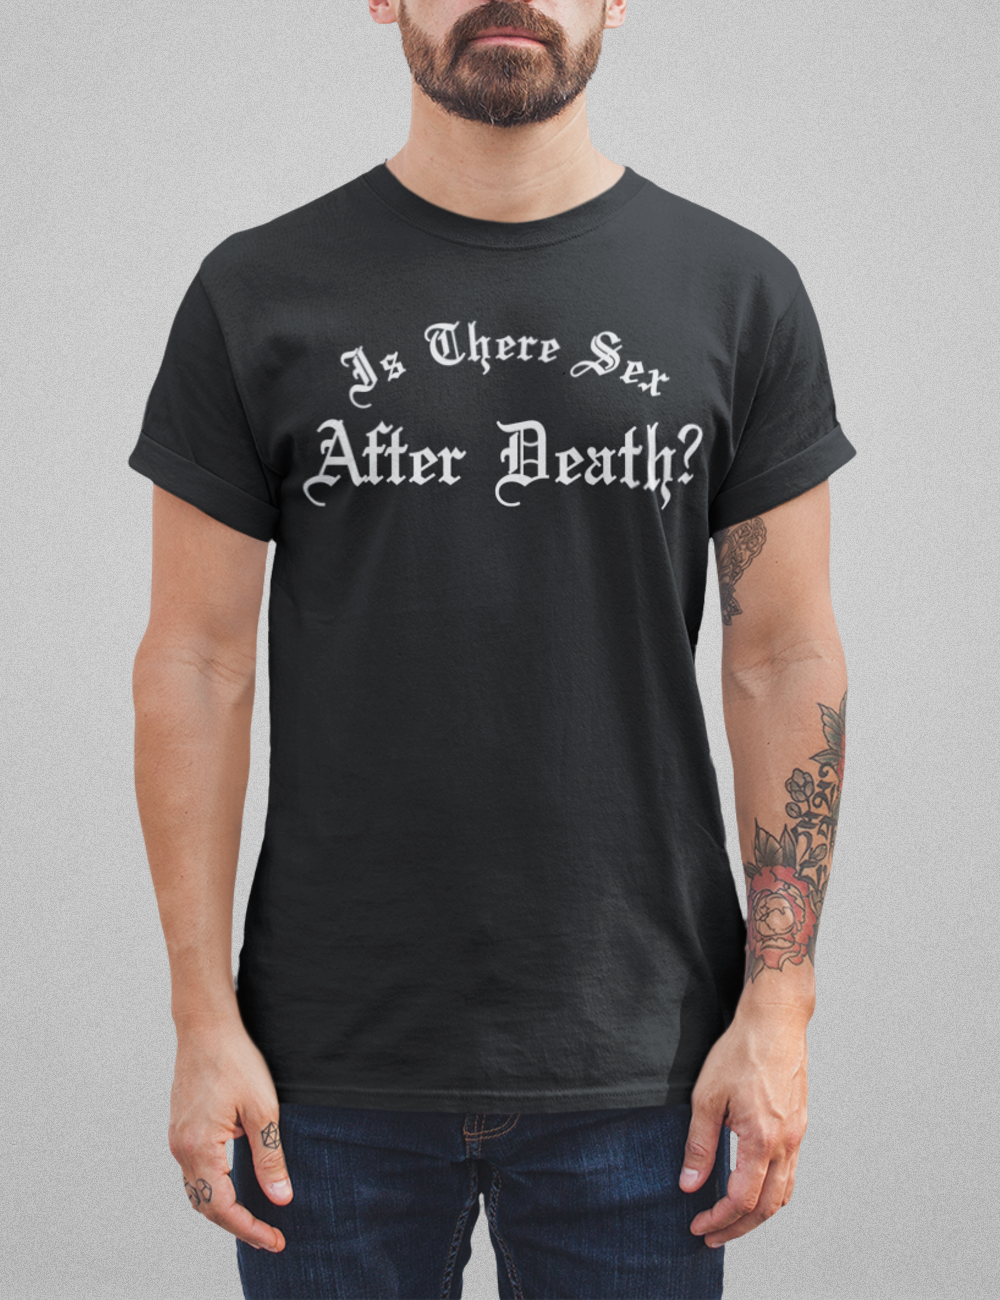 Is There Sex After Death? Men's Classic T-Shirt OniTakai